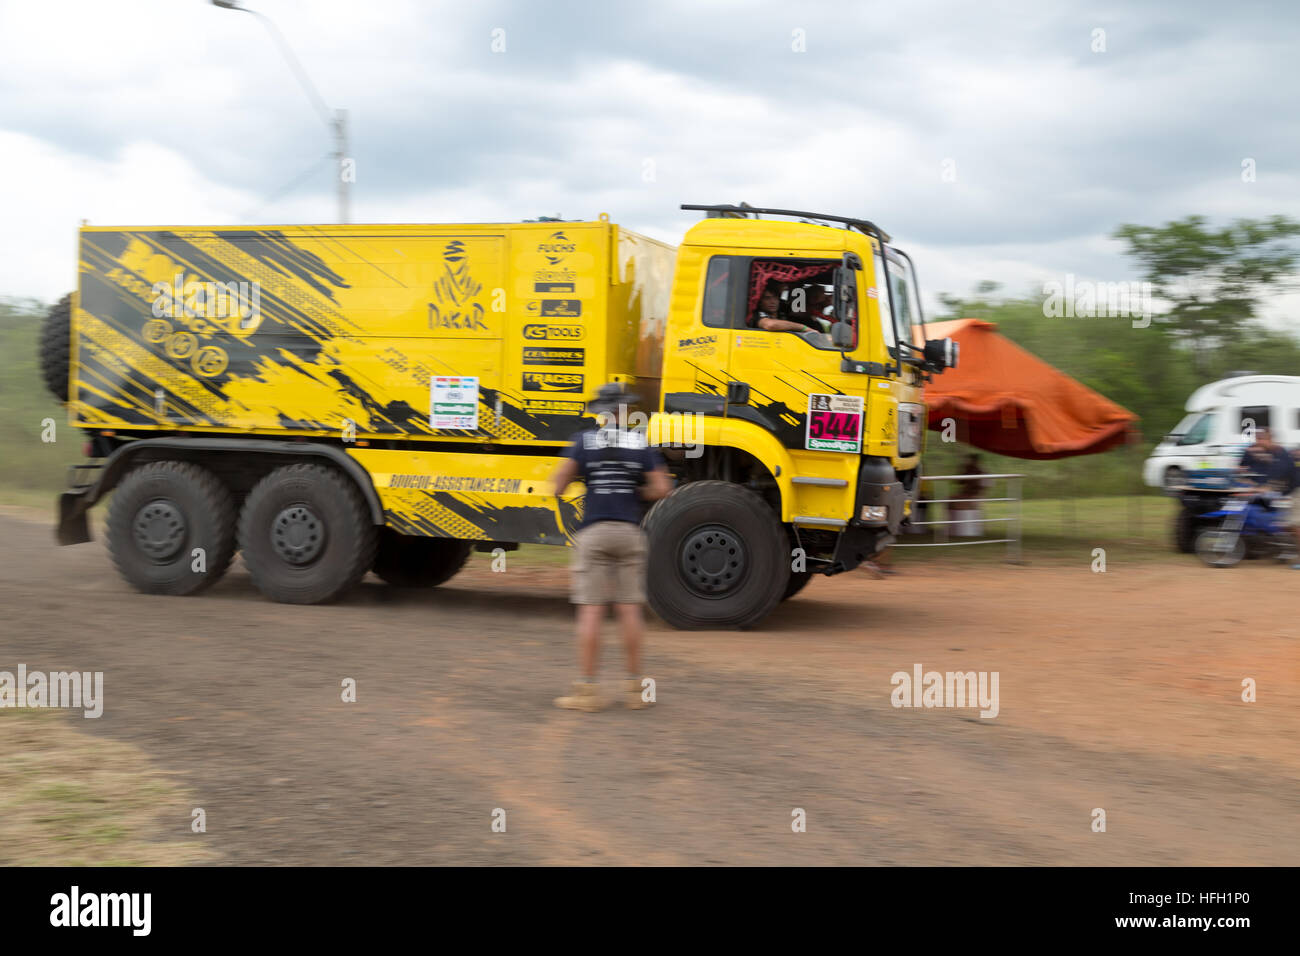 Asuncion, Paraguay. 30th December, 2016. View of #544 - Team Boucou (driver: Georges Ginesta) truck, seen during the technical scrutineering day at 2017 Dakar Rally waiting park, Nu Guazu airbase, Luque, Paraguay. Credit: Andre M. Chang/Alamy Live News Stock Photo